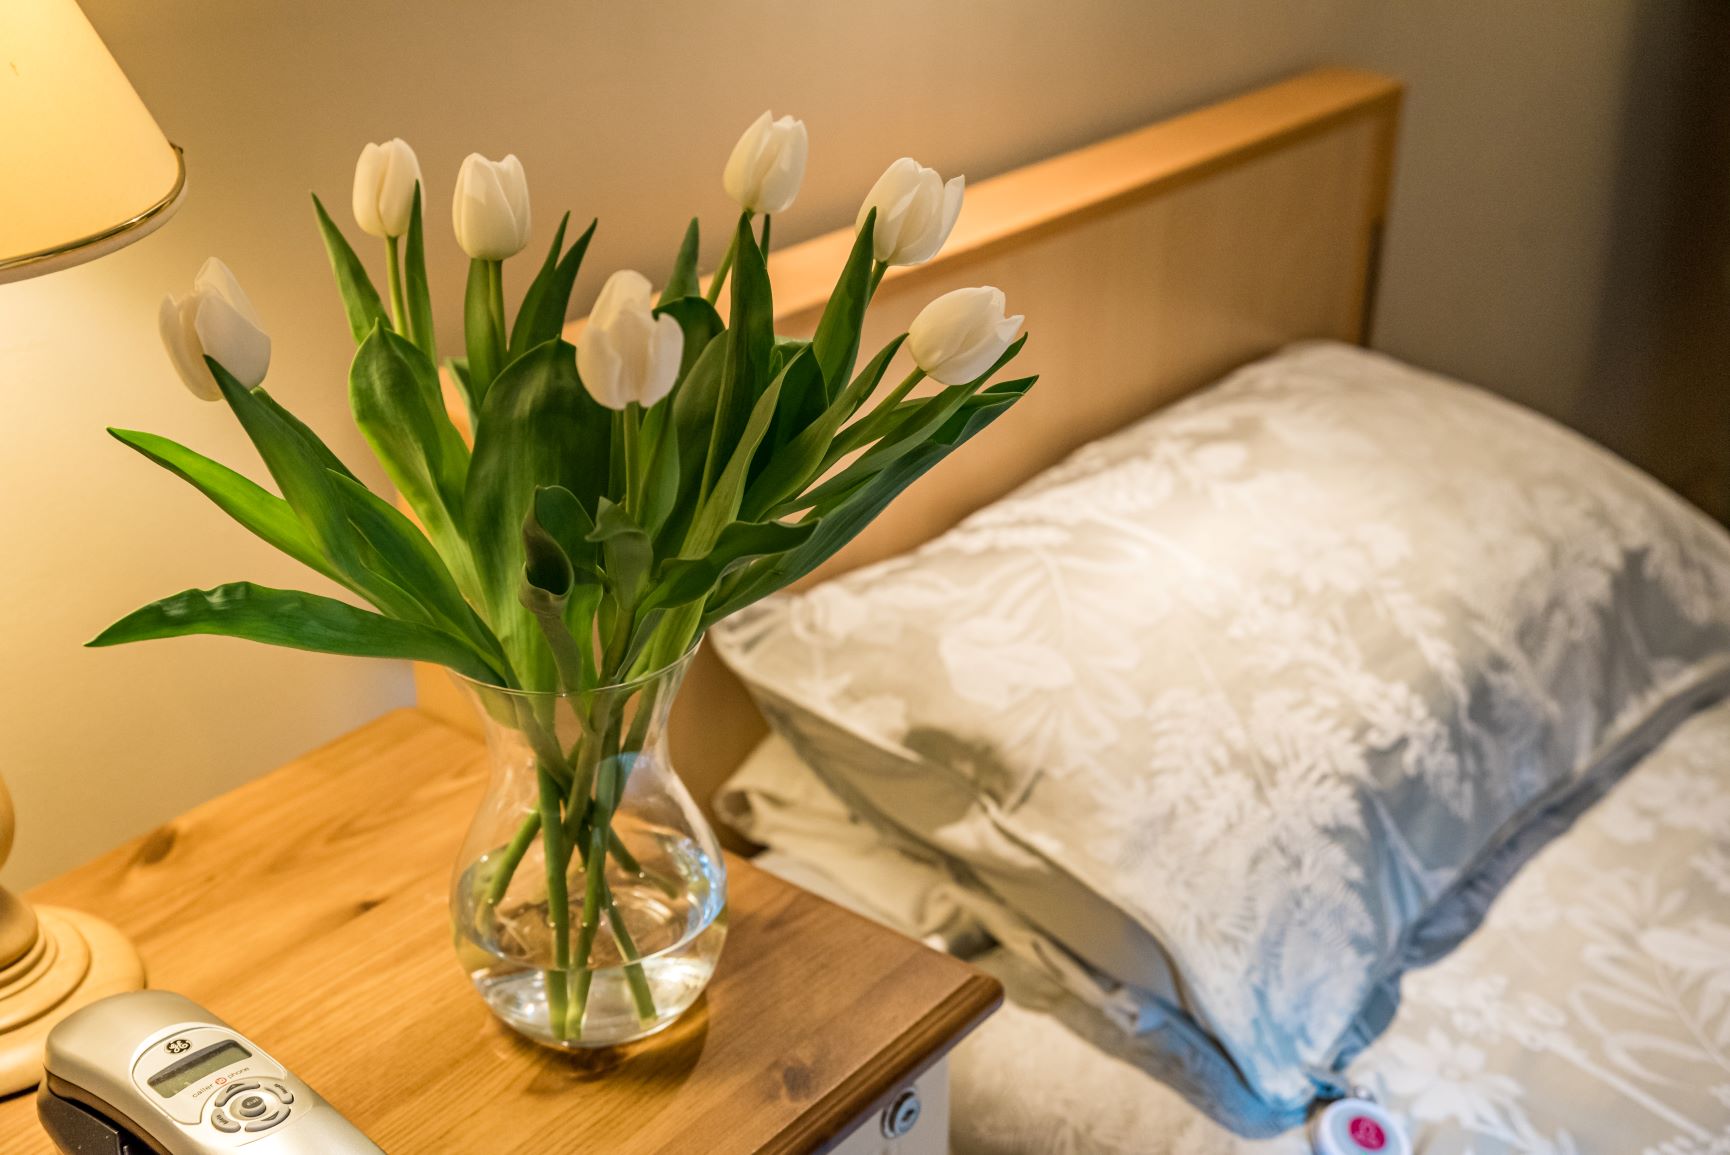 A resident's bedside table with a vase of flowers and fresh pillow.